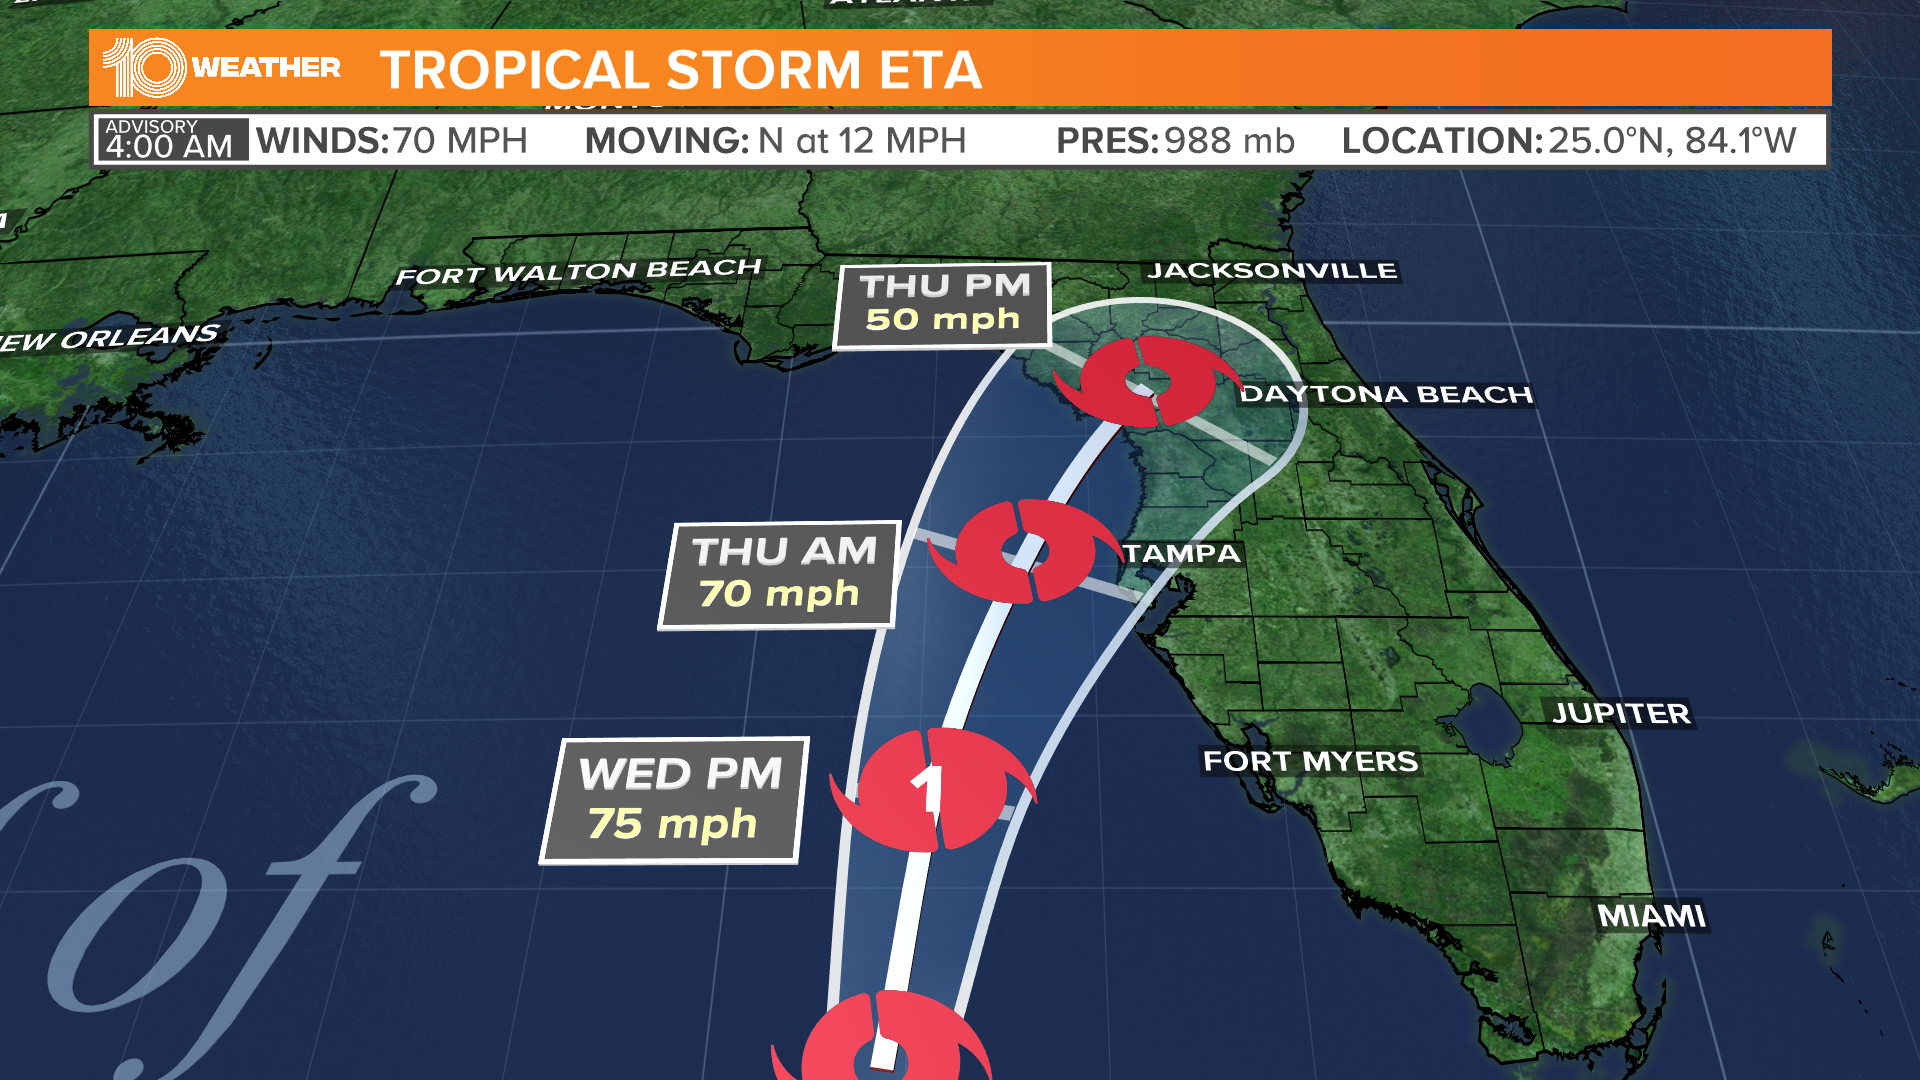 Parts of the Tampa Bay area are now under a hurricane watch as of the NHC's 4 a.m. Wednesday update.